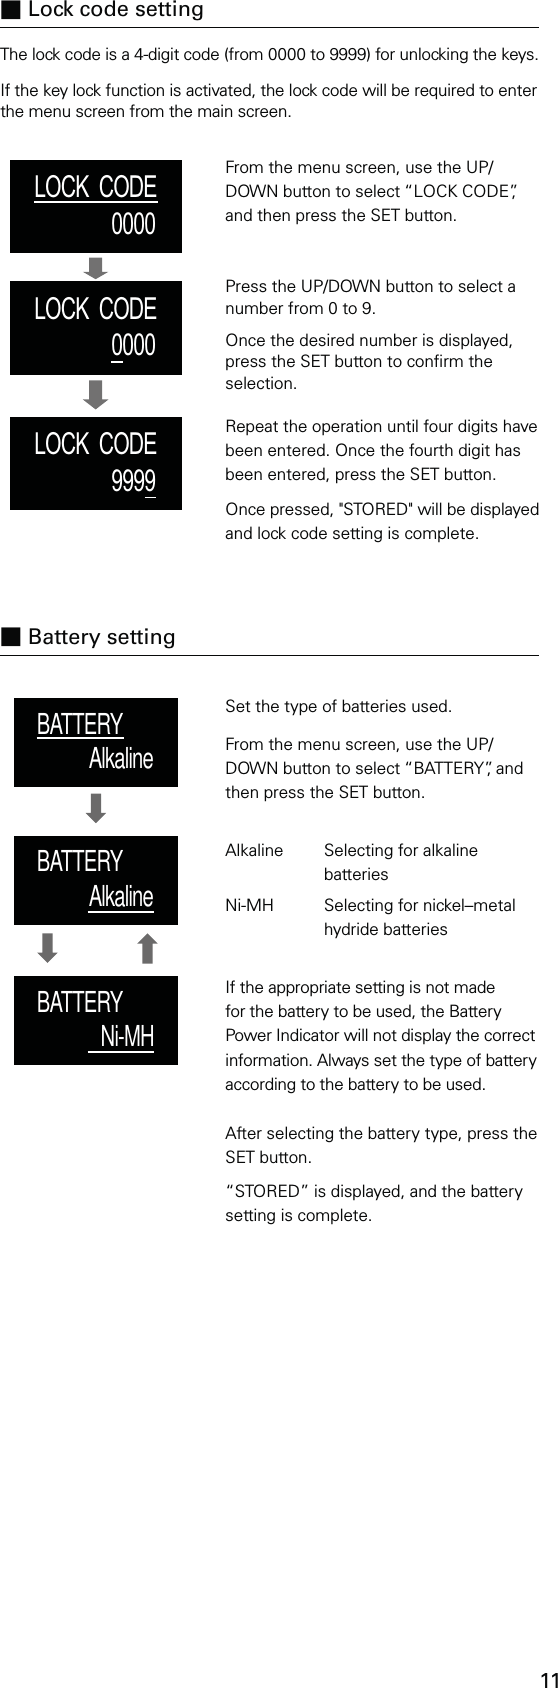 11Set the type of batteries used.From the menu screen, use the UP/DOWN button to select “BATTERY”, and then press the SET button.Alkaline  Selecting for alkaline     batteriesNi-MH   Selecting for nickel–metal    hydride batteriesIf the appropriate setting is not made for the battery to be used, the Battery Power Indicator will not display the correct information. Always set the type of battery according to the battery to be used.LOCK  CODE0000LOCK  CODE0000LOCK  CODE9999BATTERYAlkalineBATTERYAlkalineBATTERYNi-MHThe lock code is a 4-digit code (from 0000 to 9999) for unlocking the keys.If the key lock function is activated, the lock code will be required to enter the menu screen from the main screen.■ Lock code settingFrom the menu screen, use the UP/DOWN button to select “LOCK CODE”, and then press the SET button.Press the UP/DOWN button to select a number from 0 to 9.Once the desired number is displayed, press the SET button to conrm the selection.Repeat the operation until four digits have been entered. Once the fourth digit has been entered, press the SET button.Once pressed, &quot;STORED&quot; will be displayed and lock code setting is complete.After selecting the battery type, press the SET button.“STORED” is displayed, and the battery setting is complete.■ Battery setting